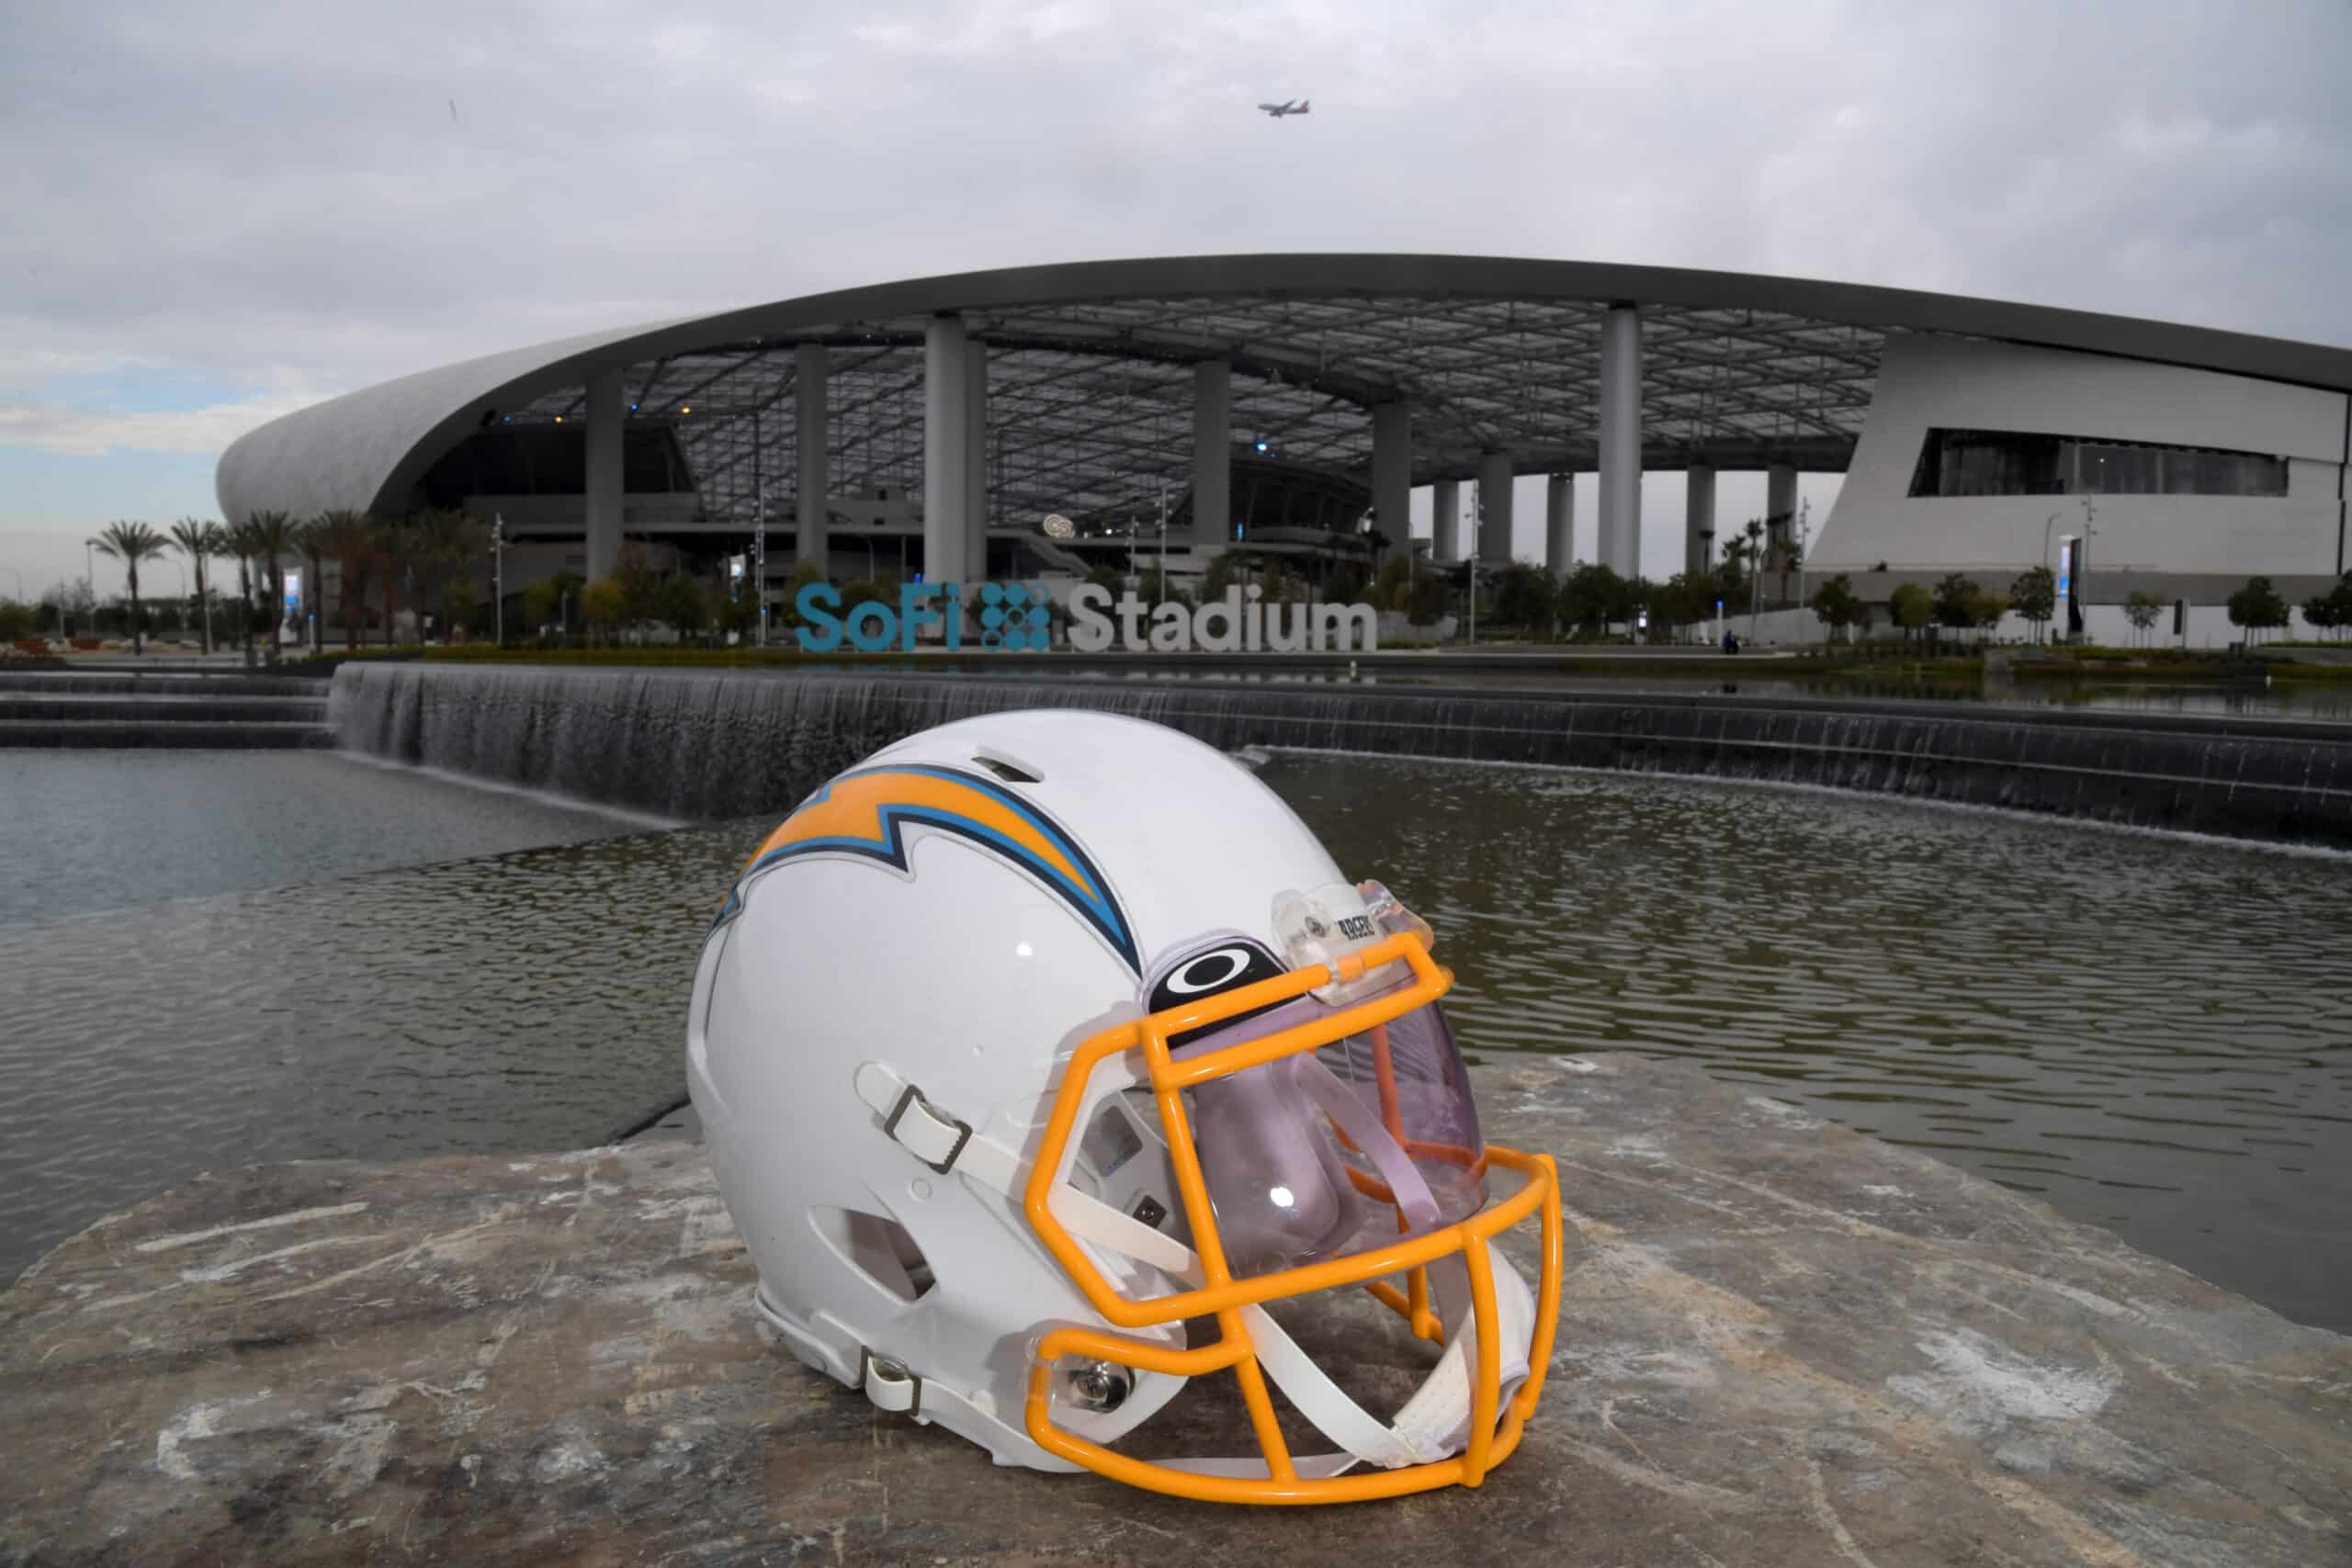 Dec 27, 2020; Inglewood, California, USA; A general view of a Los Angeles Chargers helmet at Lake Park SoFi Stadium before the game against the Denver Broncos. 